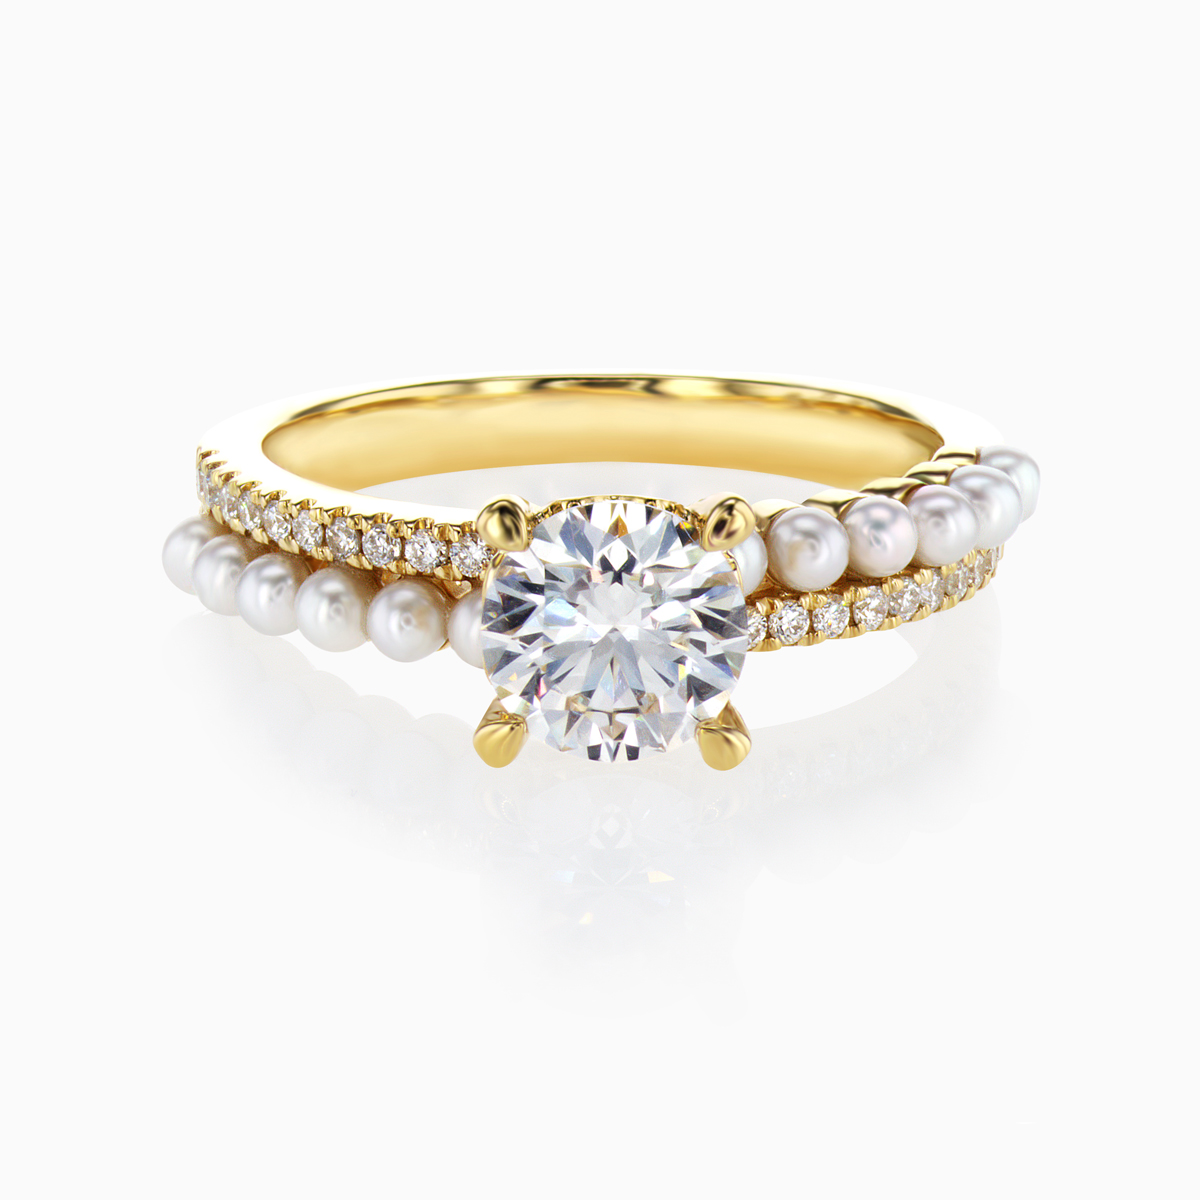 1.07carat Lab-Grown Diamond & Pearl Double Row Ring in 18k White Gold